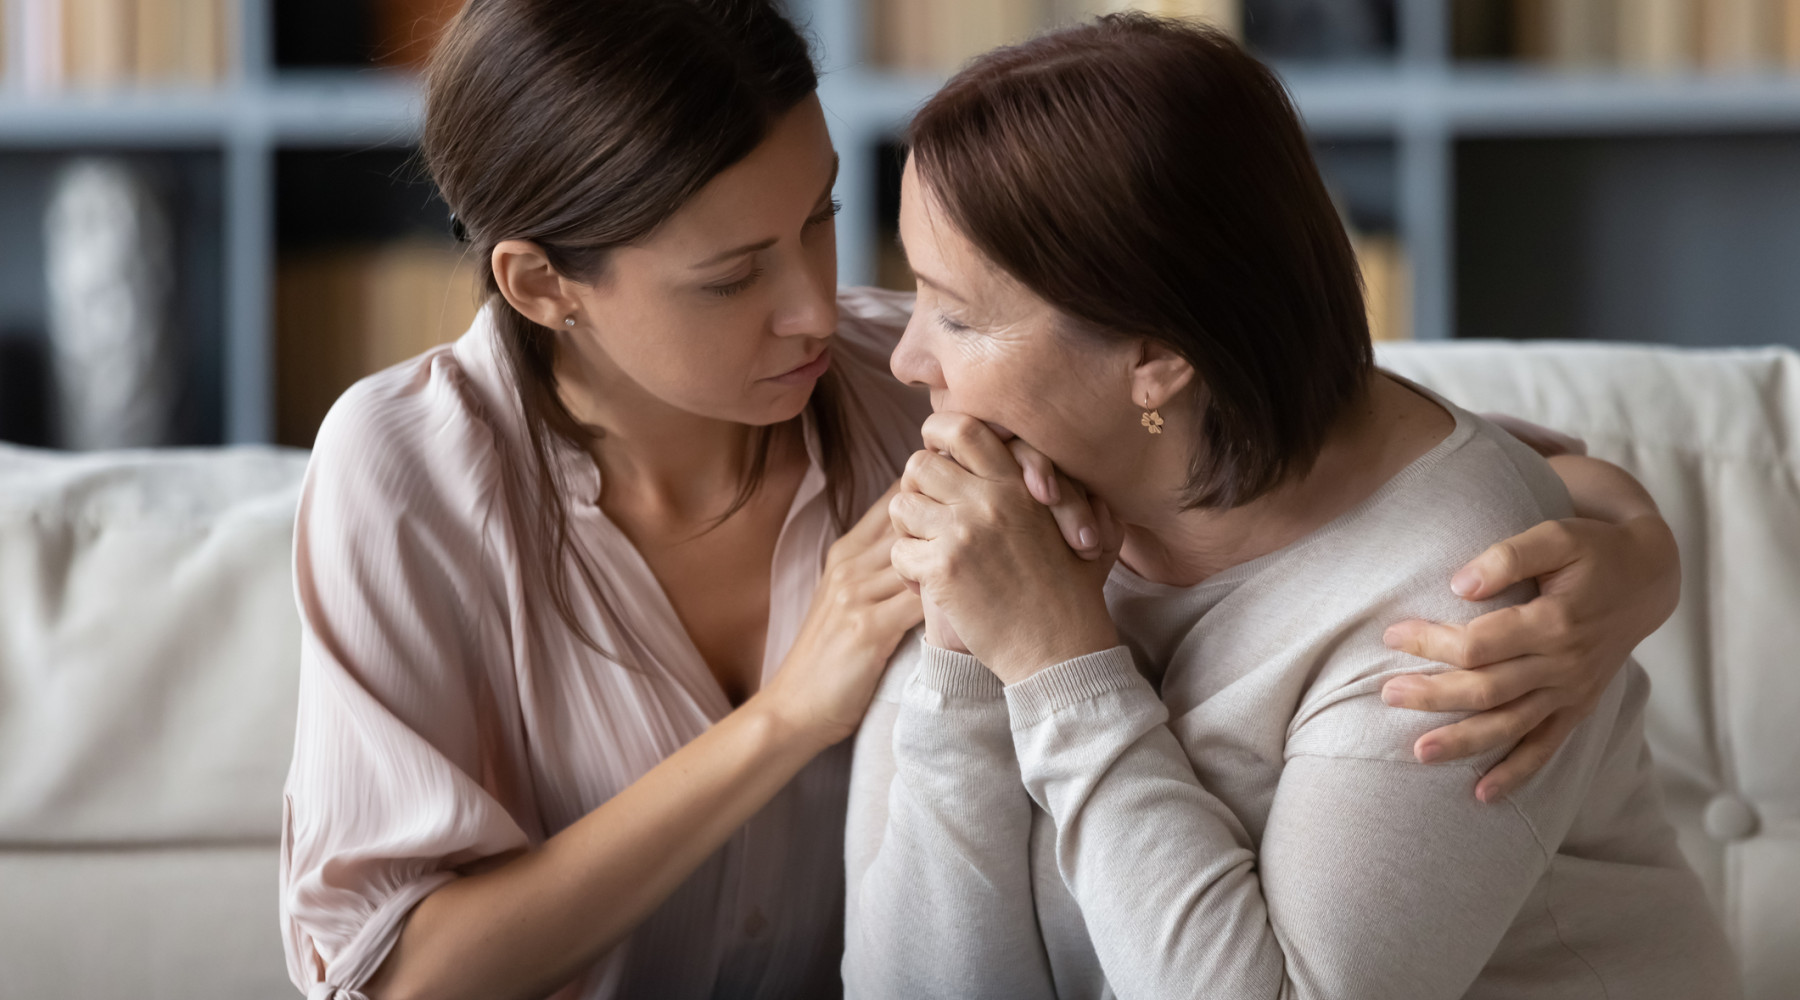 woman providing emotional support to mother with Acquired Brain Injury